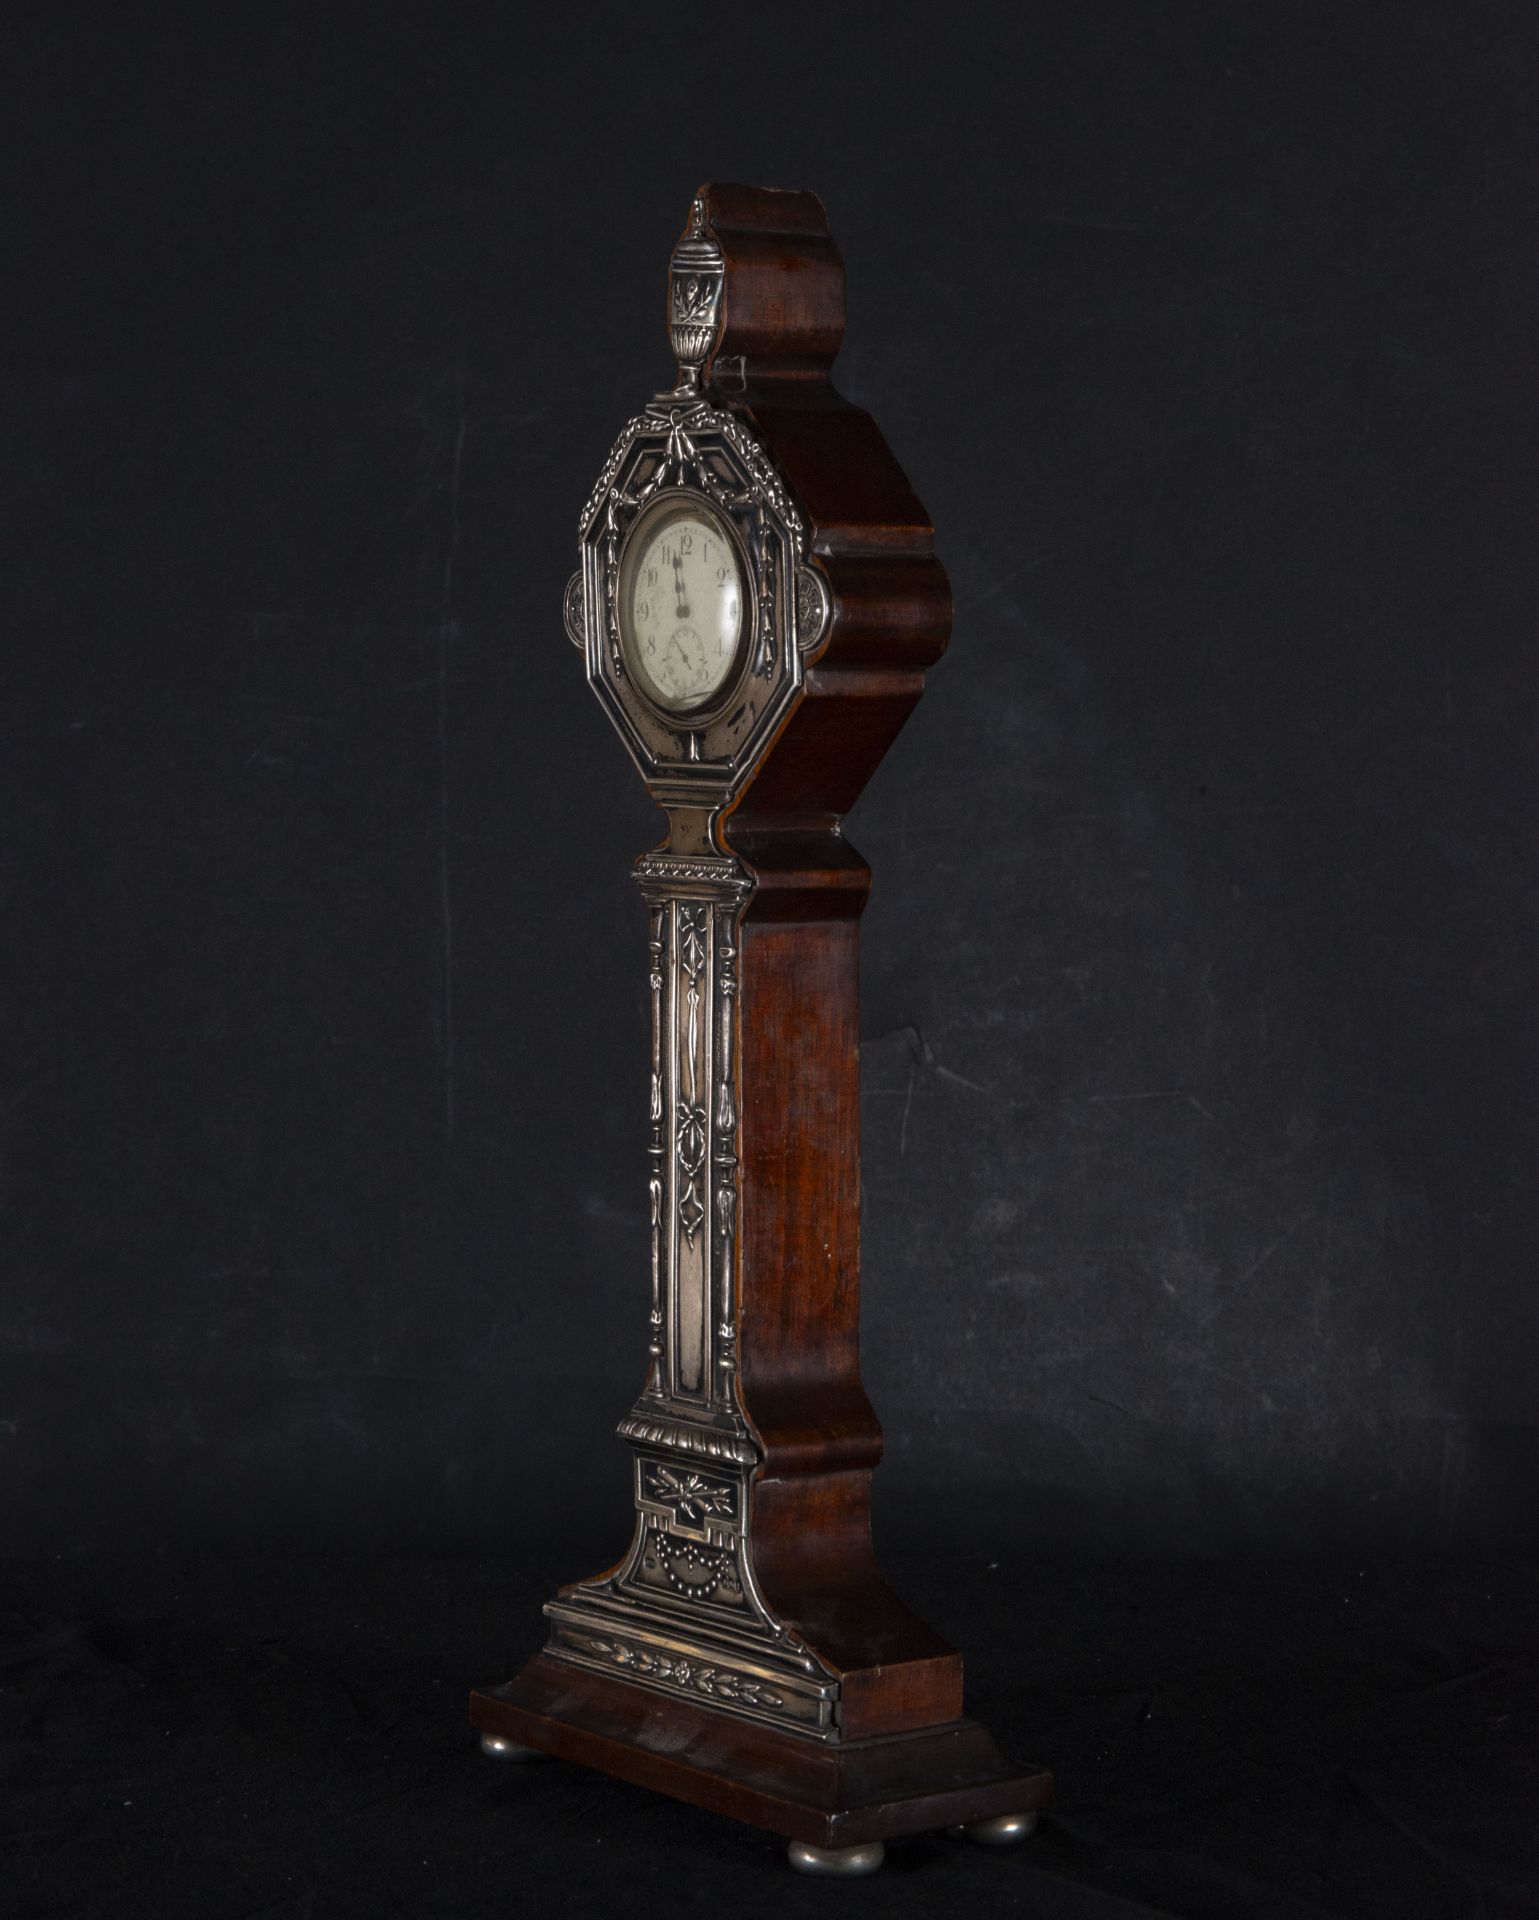 Mahogany clock covered with embossed silver, 19th century - Image 2 of 3